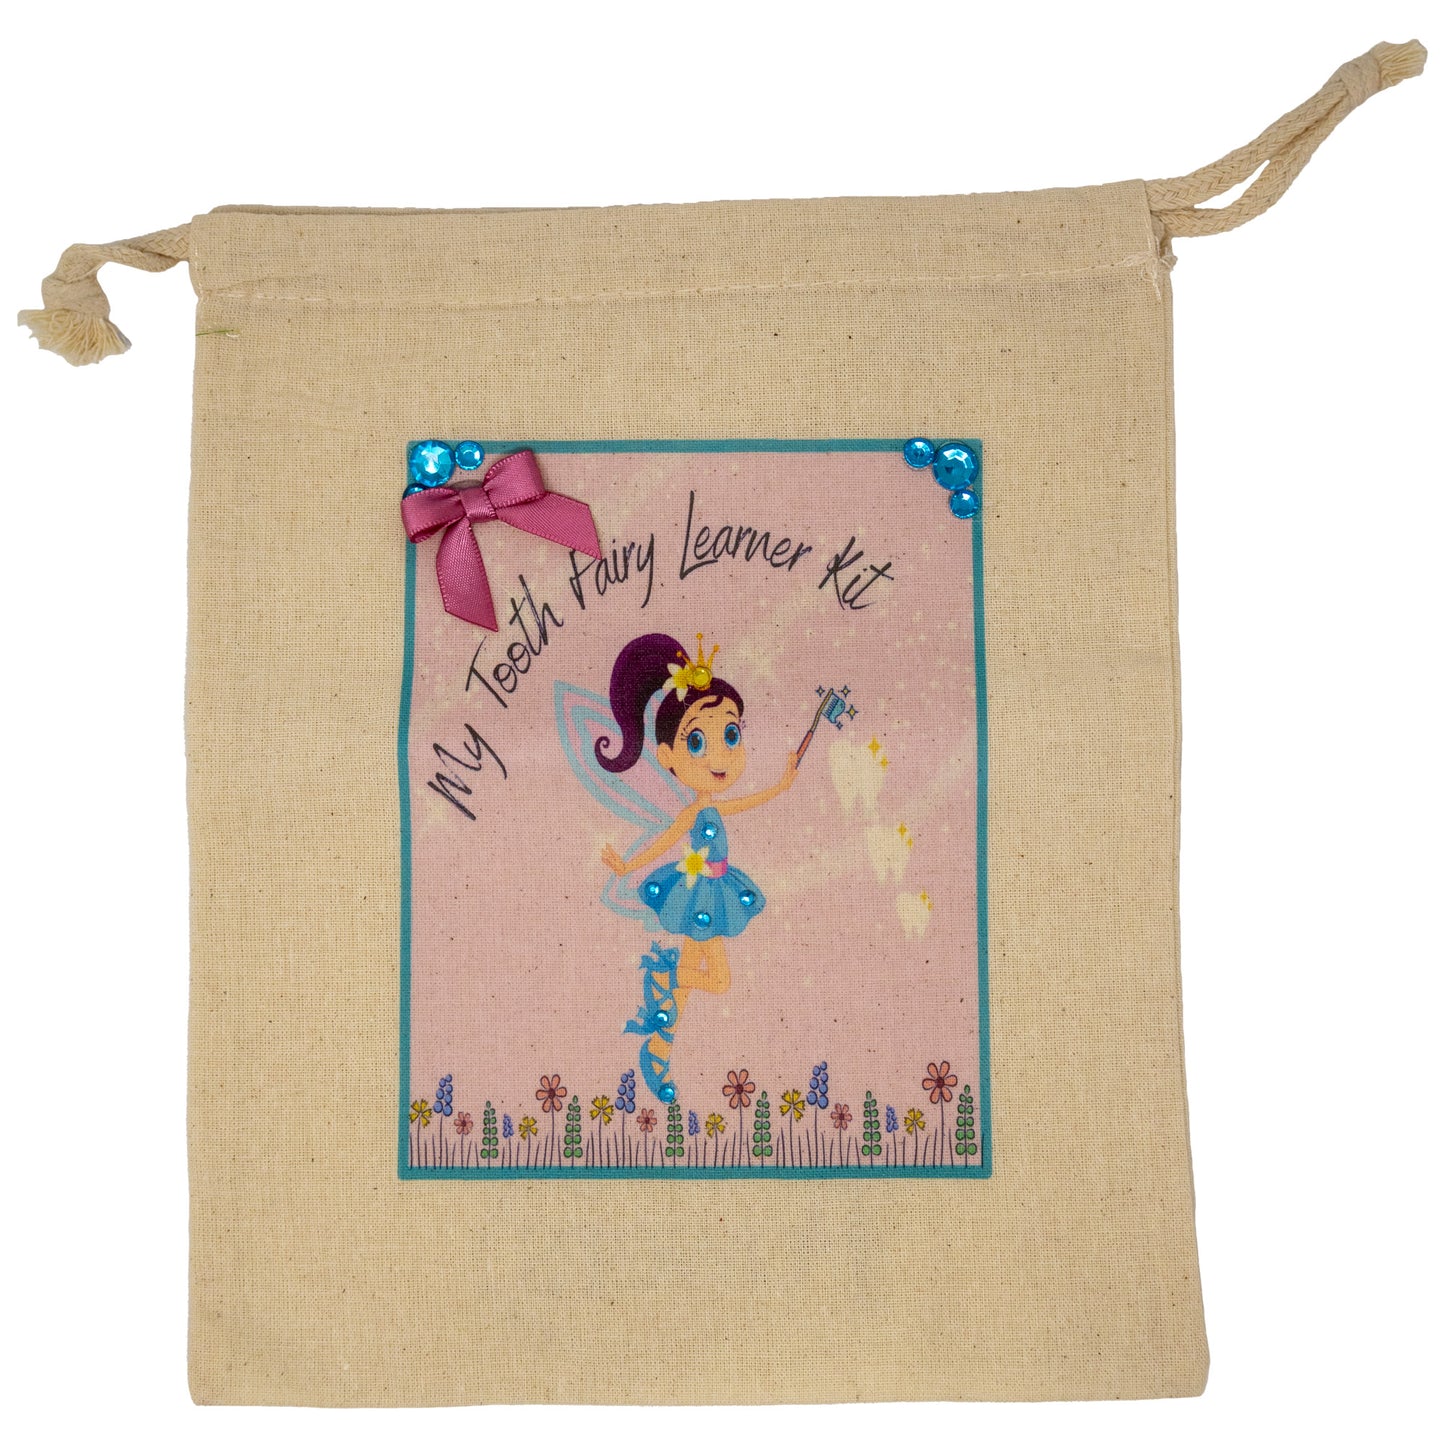 Tooth Fairy Learner Kit for Girls